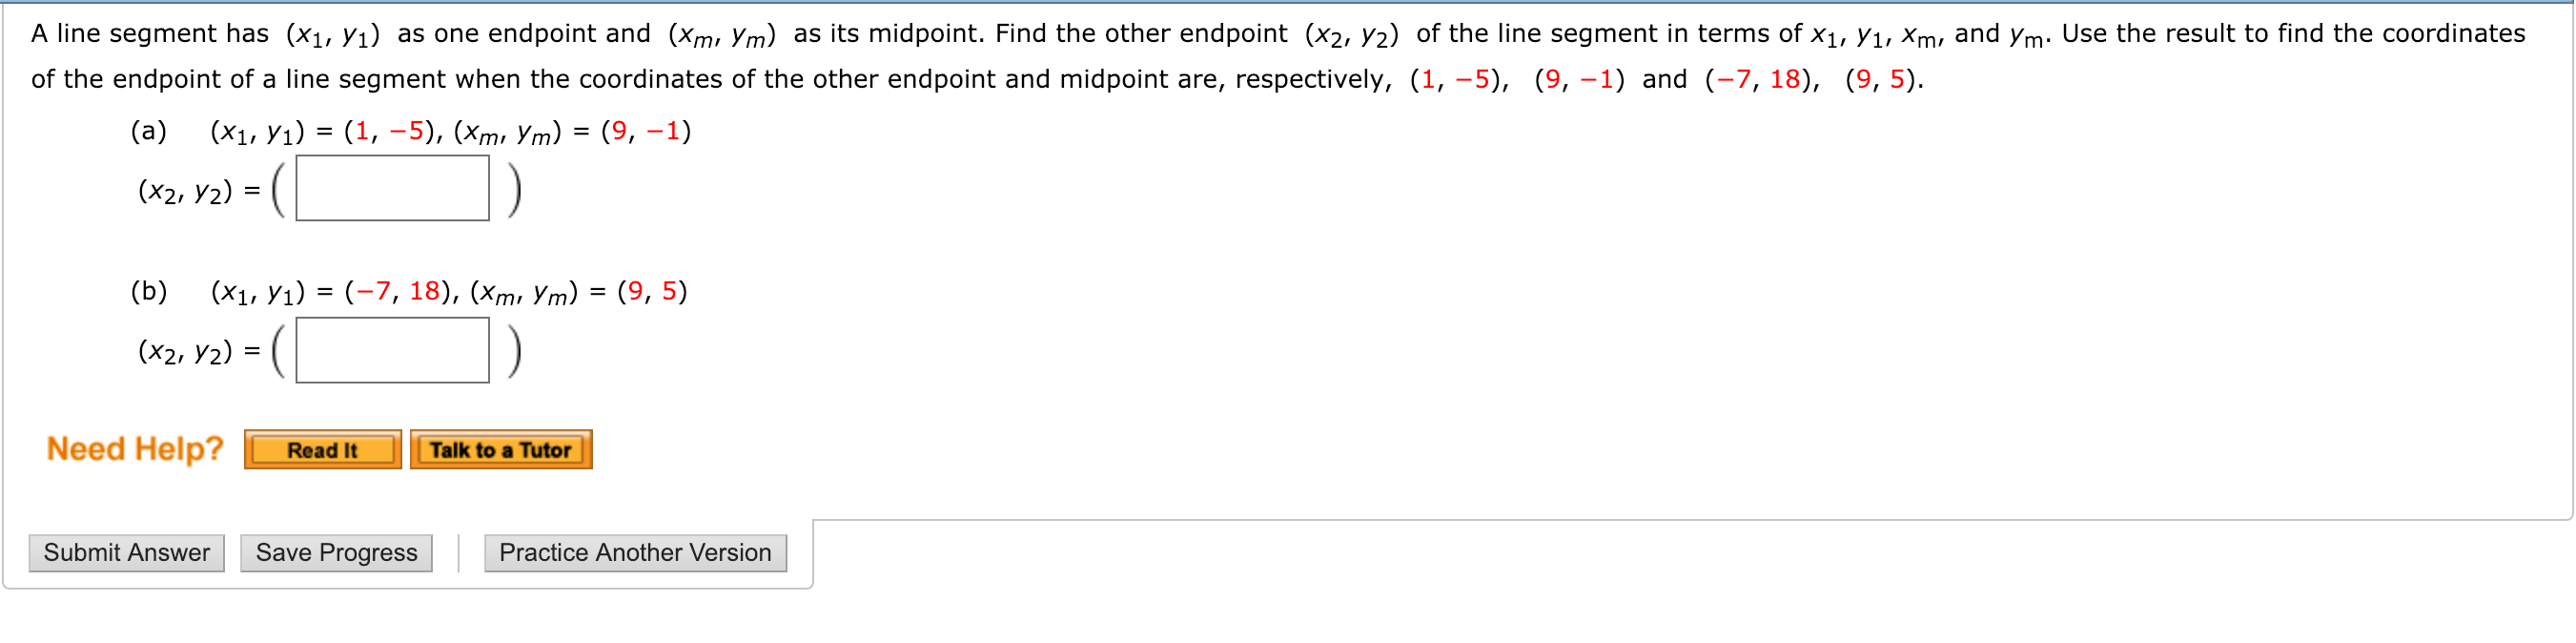 A line segment has (xi, Vı) as one endpoint and (Xmi Ym) as its midpoint. Find the other endpoint (x2, V2) of the line segment in terms of x1, V1, Xm, and ym Use the result to find the coordinates
of the endpoint of a line segment when the coordinates of the other endpoint and midpoint are, respectively, (1, -5), (9, -1) and (, 18), (9,5)
(x2, y2)
(b) x7, 18), (mi Ym) - (9, 5)
(x2, y2) -
Need Help?
Read ItTalk to a Tutor
Submit Answer
Save Progress
Practice Another Version
